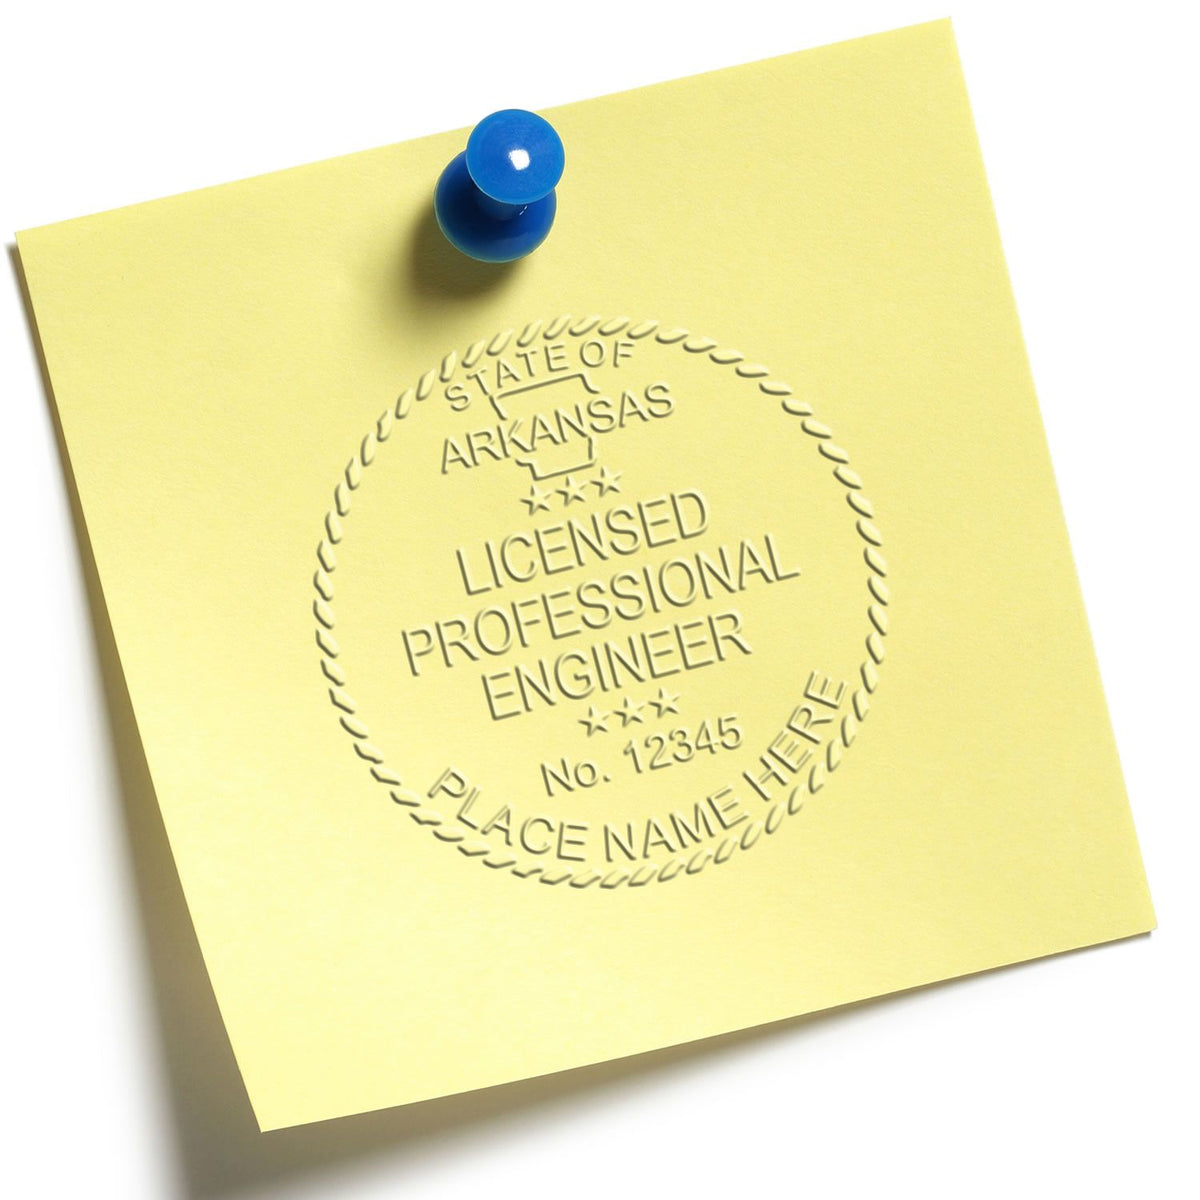 This paper is stamped with a sample imprint of the Soft Arkansas Professional Engineer Seal, signifying its quality and reliability.